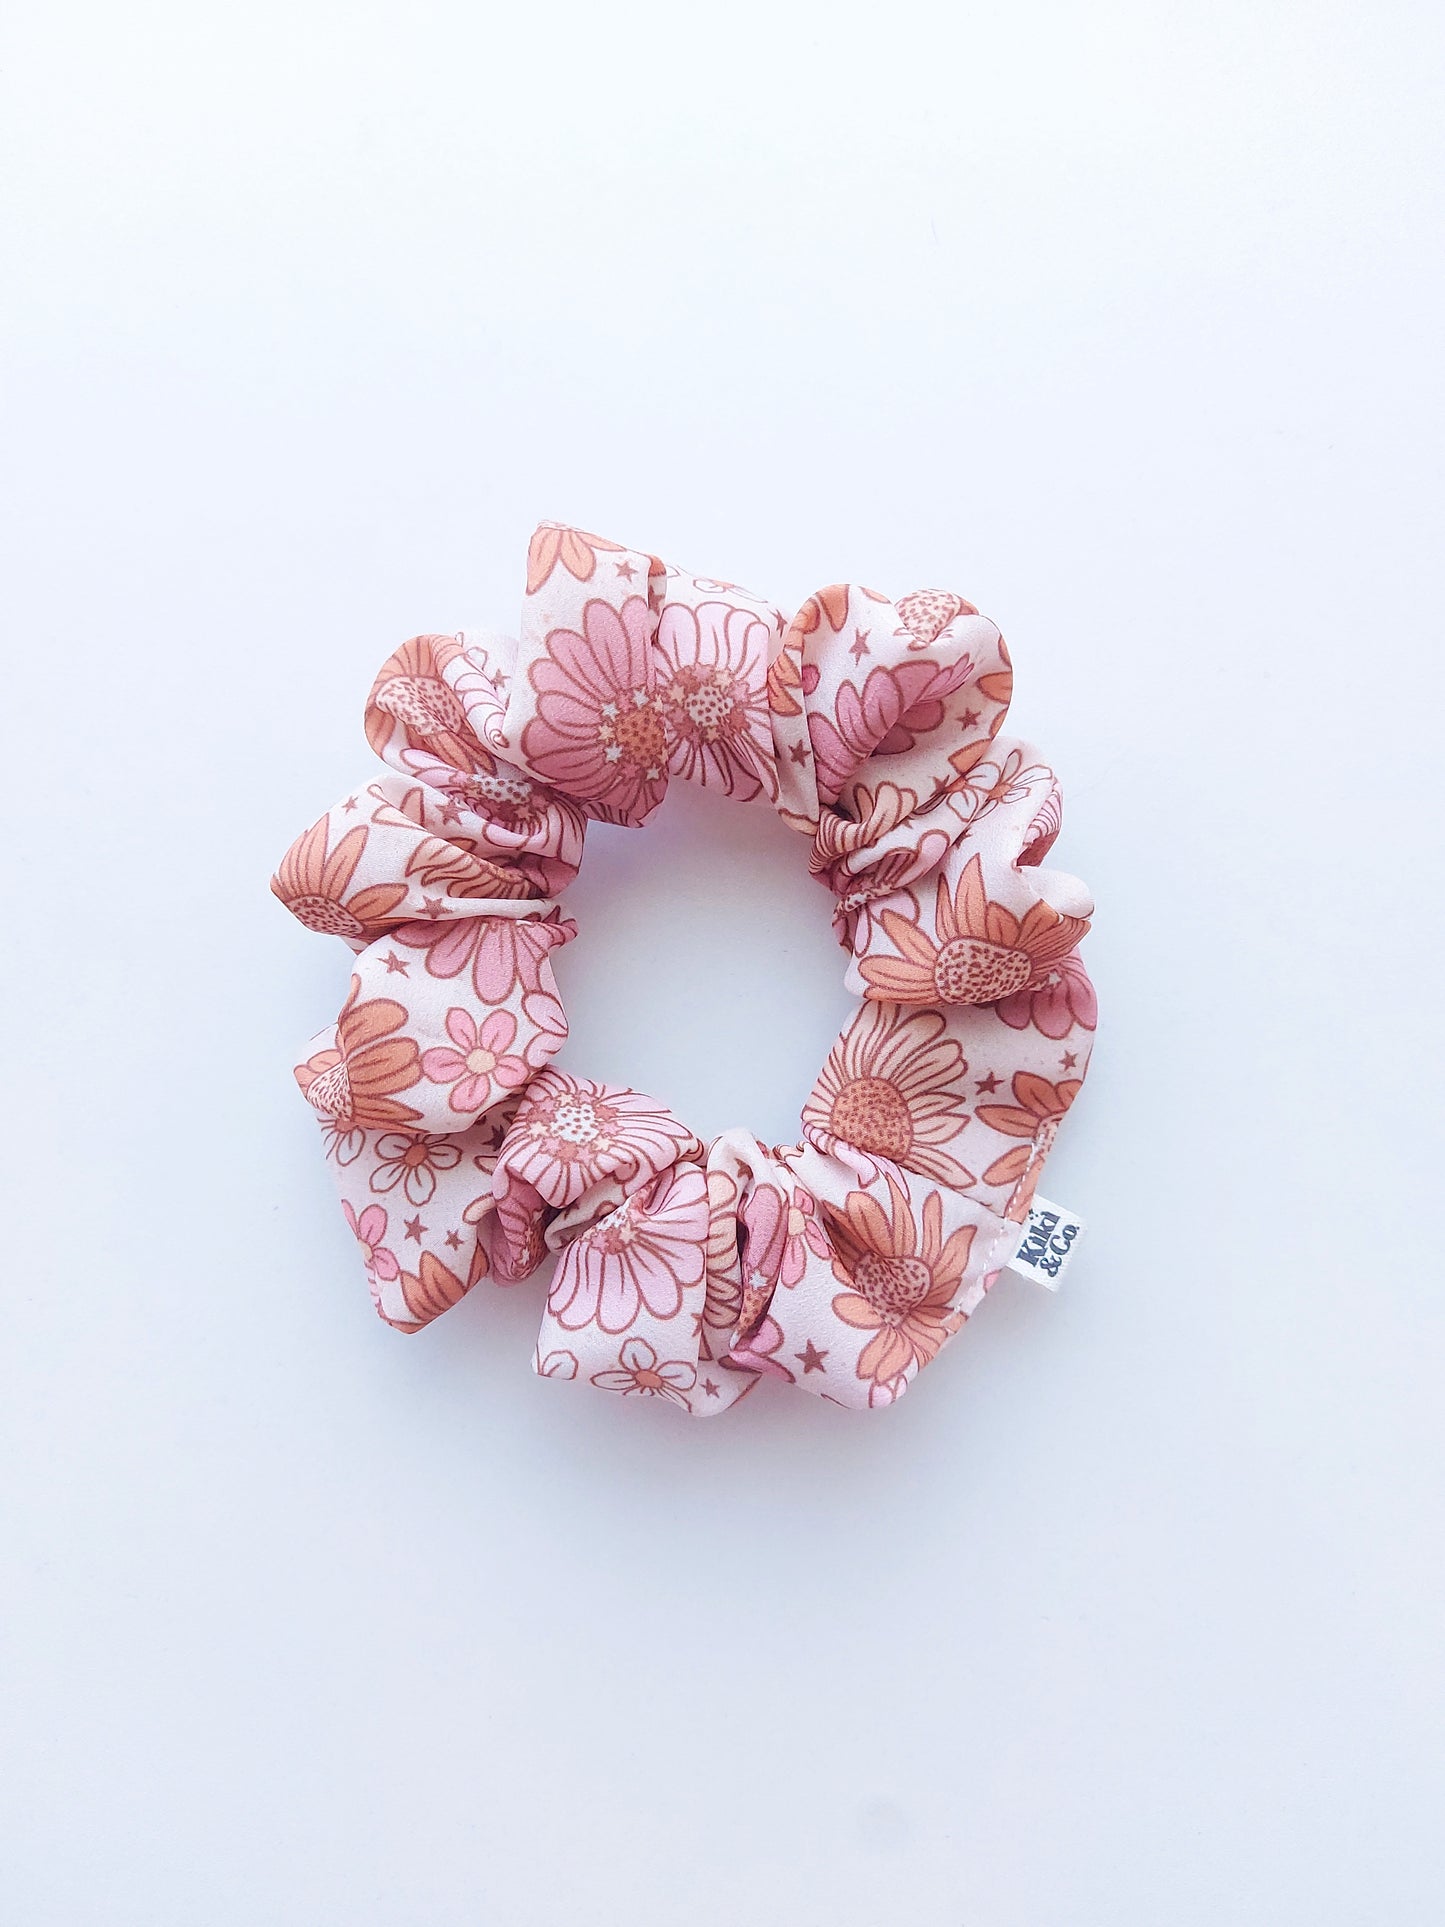 NEW Scrunchie / Fall Floral / Crepe Fabric